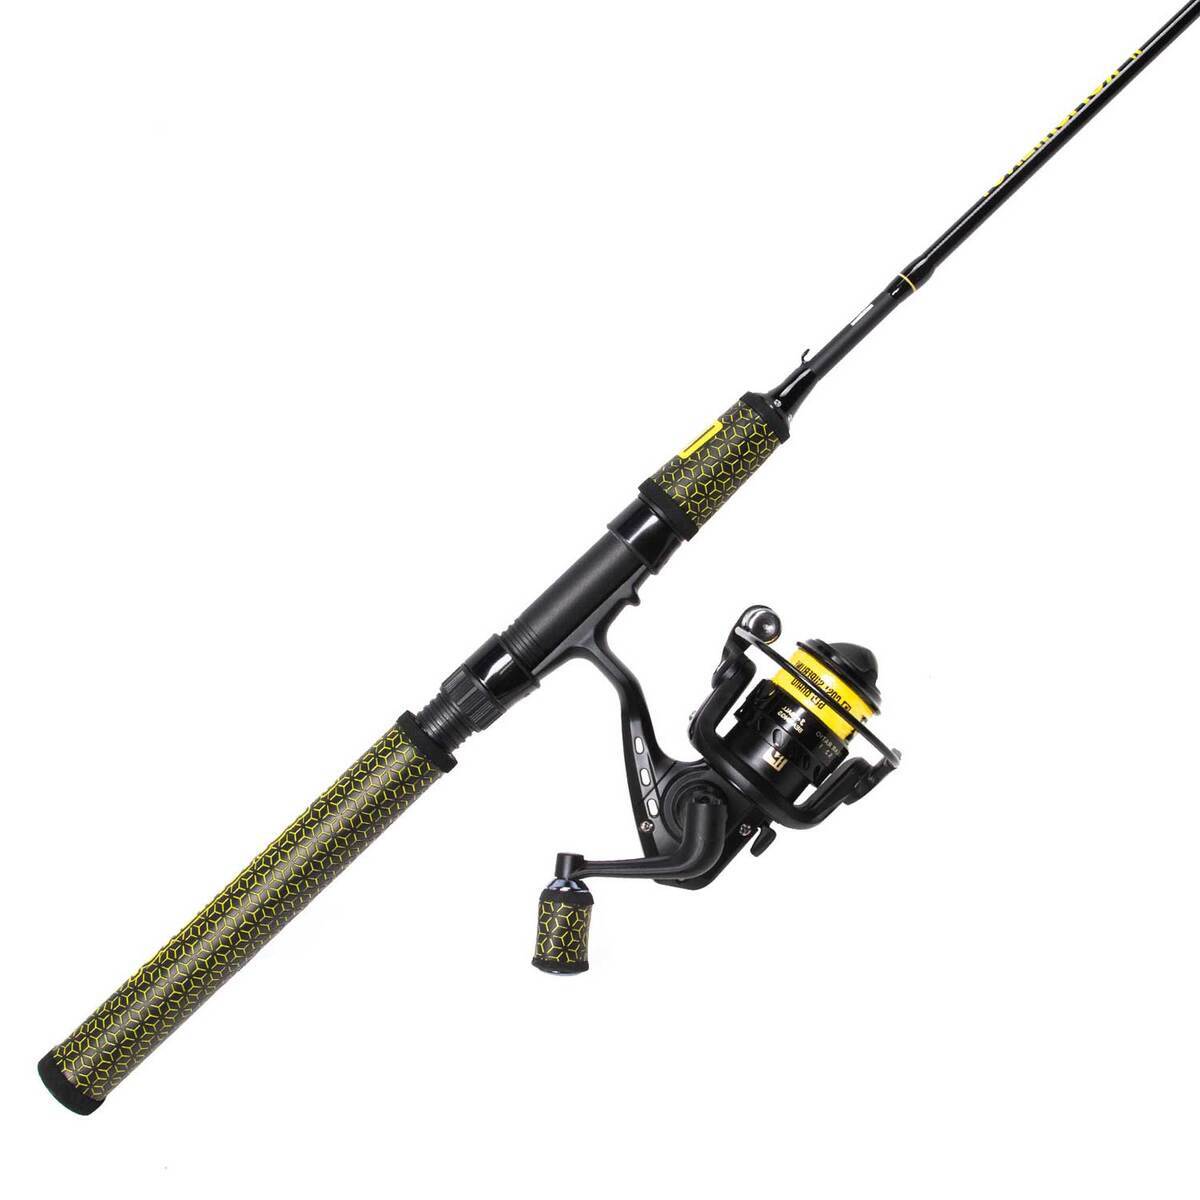 Profishiency Bumblebee Spinning Rod and Reel Combo - 5ft 6in